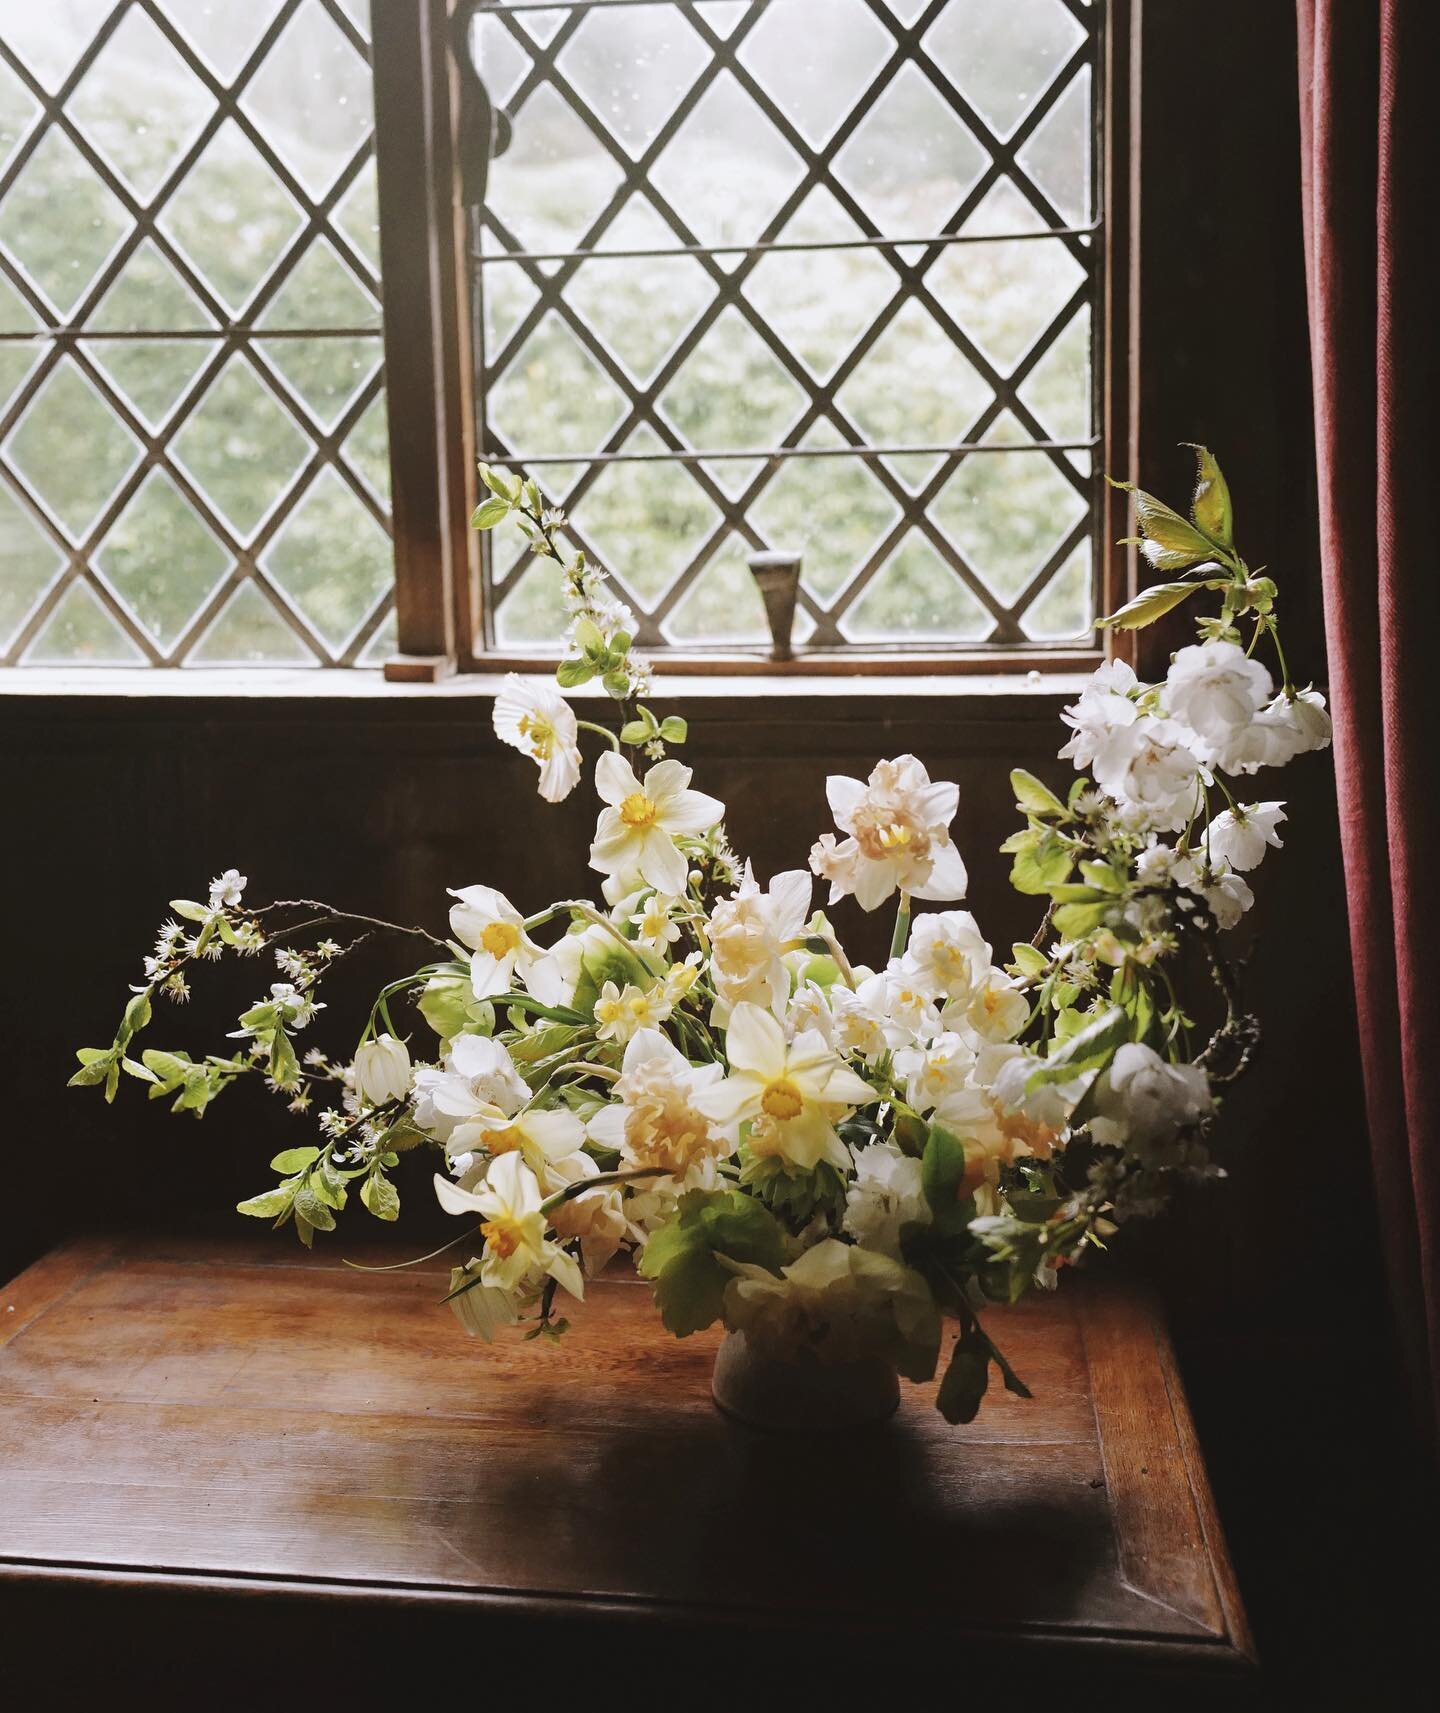 Windowsill Wednesday. The rain and the wind got under my skin today. Hair is disheveled. Bones are cold. But there&rsquo;s flowers; cherry blossoms dripping over the pavements, primroses sweetly shining in the shady corners of the garden, and daffodi